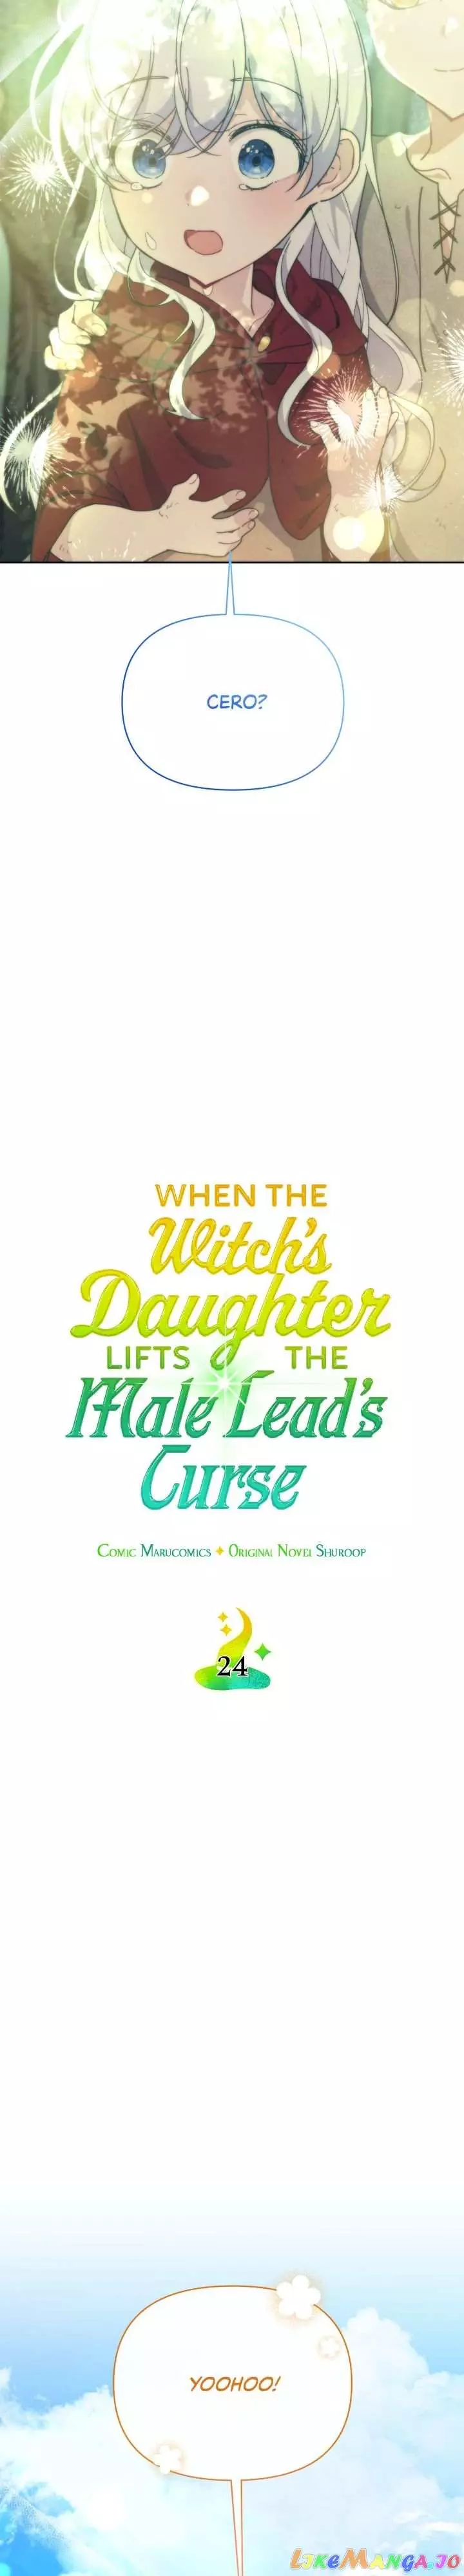 When The Witch’S Daughter Lifts The Male Lead’S Curse - 24 page 12-9705fd51